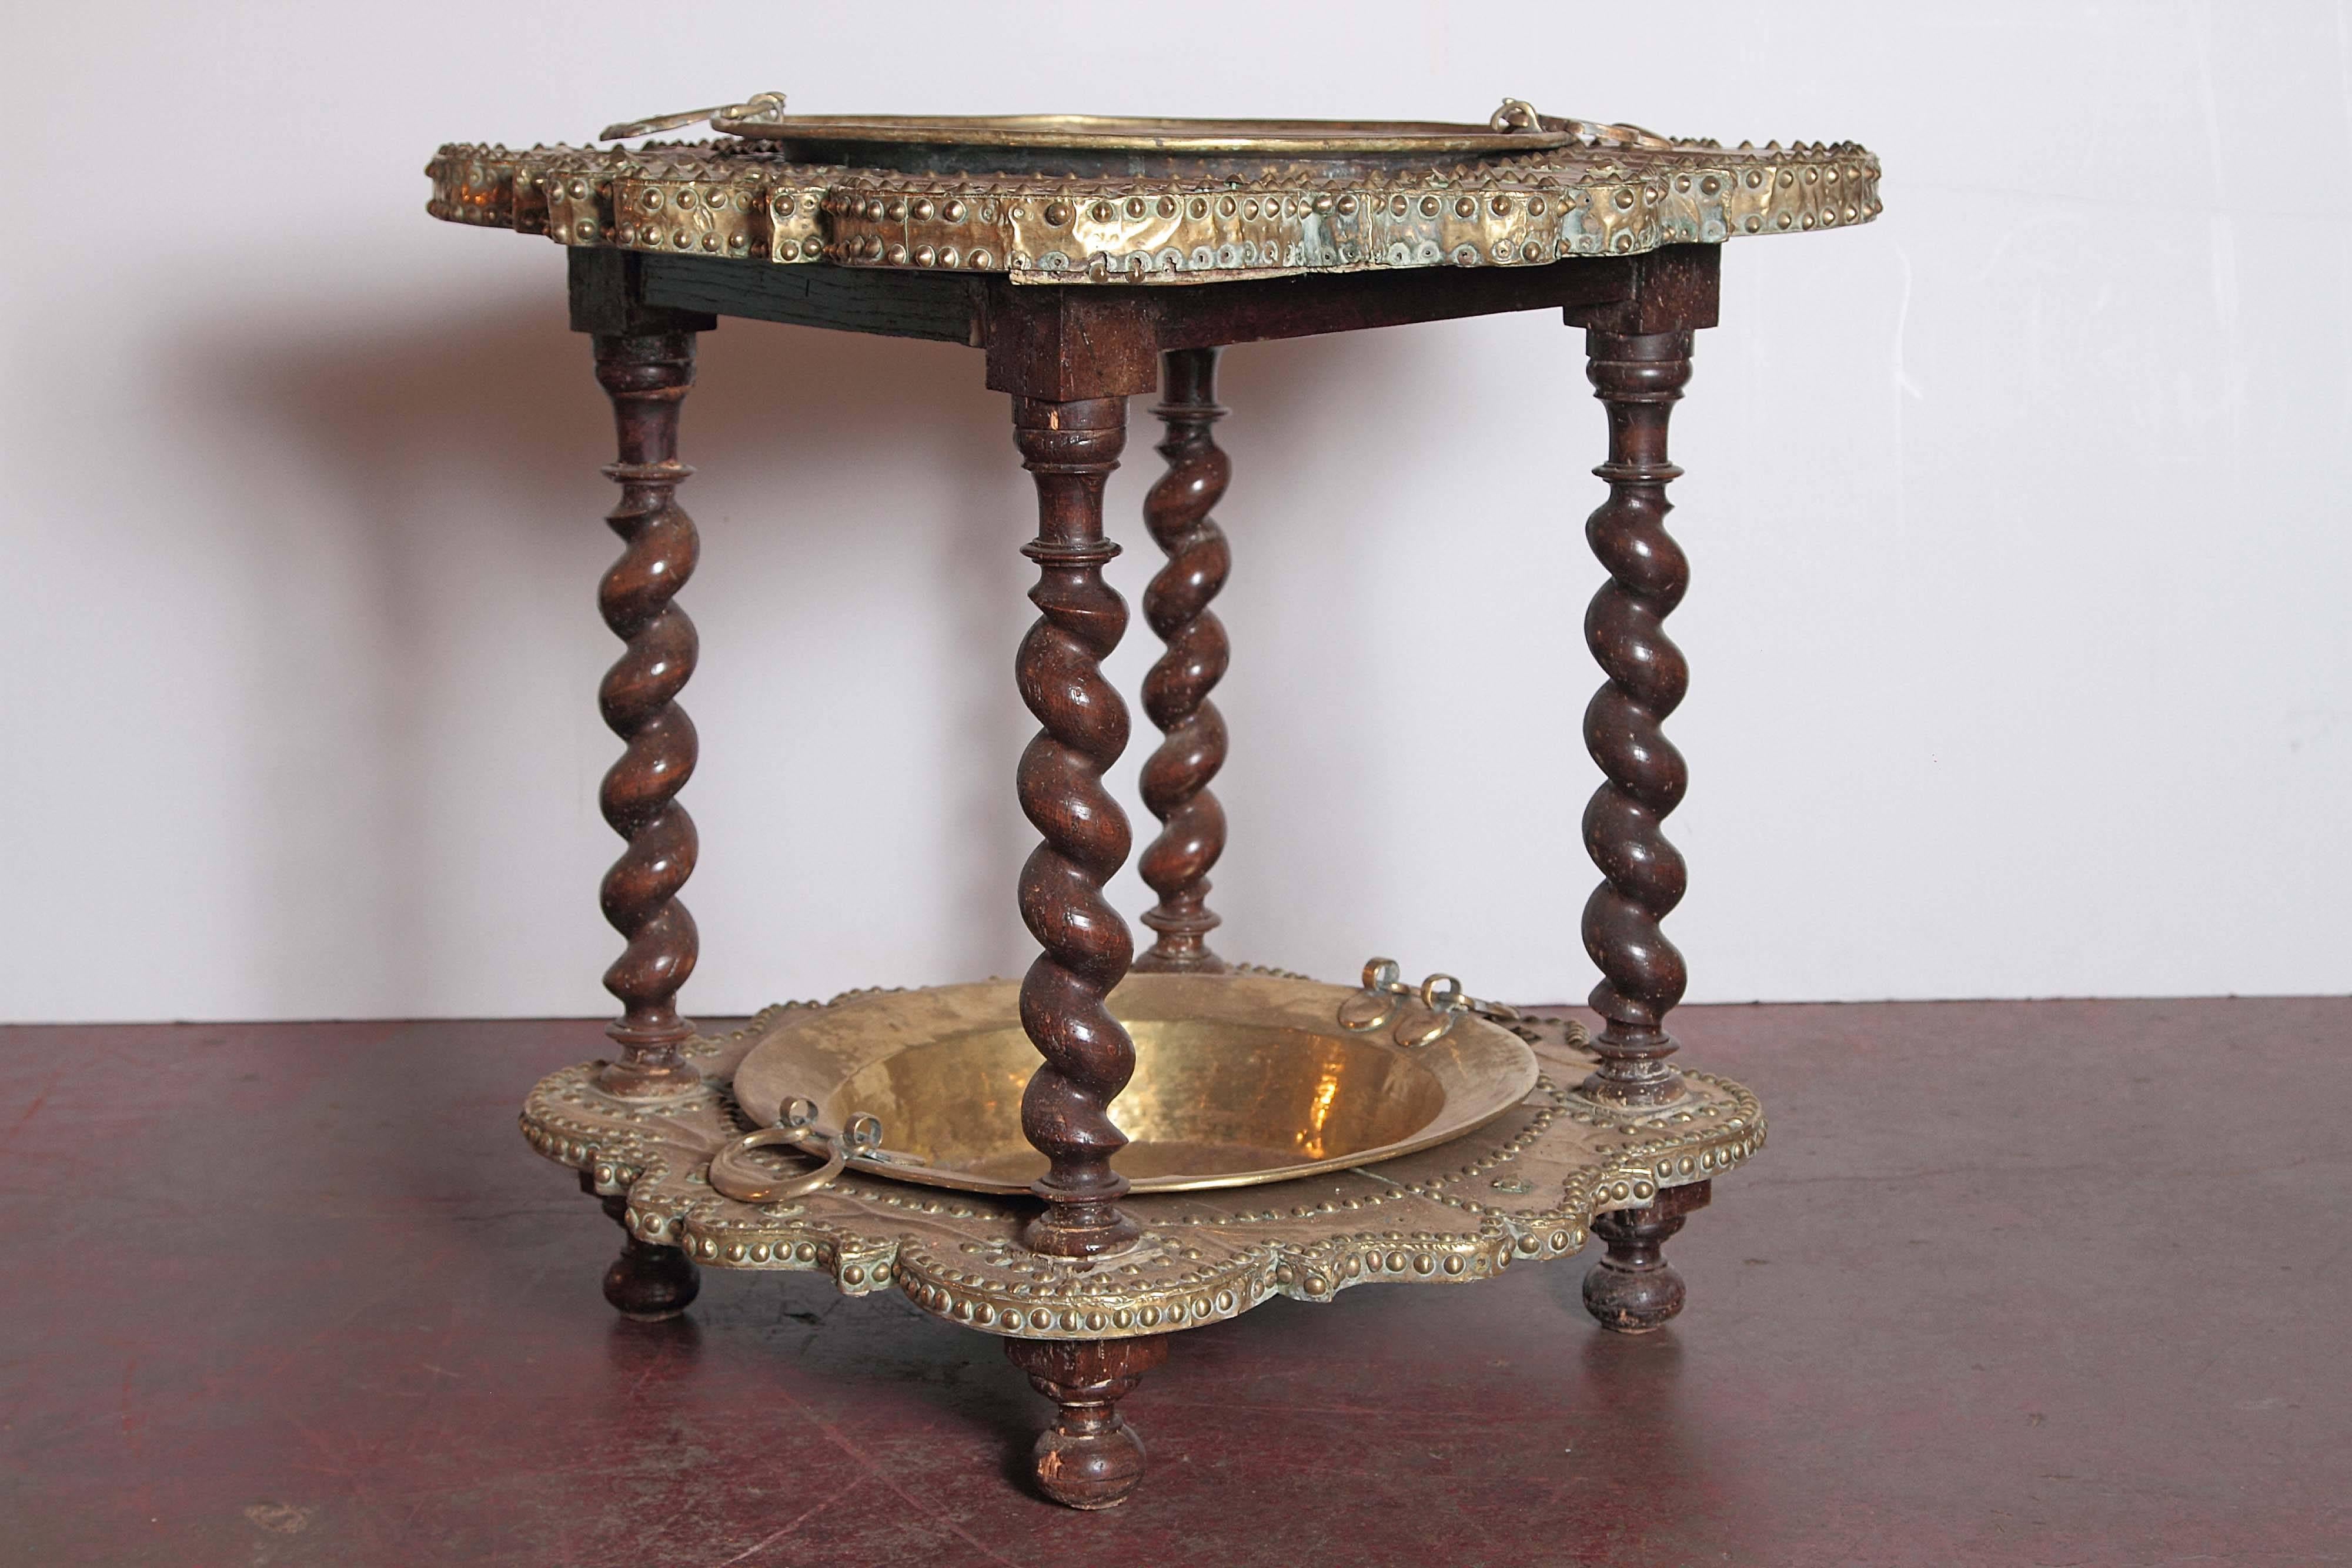 This unique, interesting fruit wood brasero was crafted in Spain, circa 1780. The antique table features four walnut barley twist legs, and two removable brass trays. The rustic piece is embellished with geometric motifs and designs, and is complete